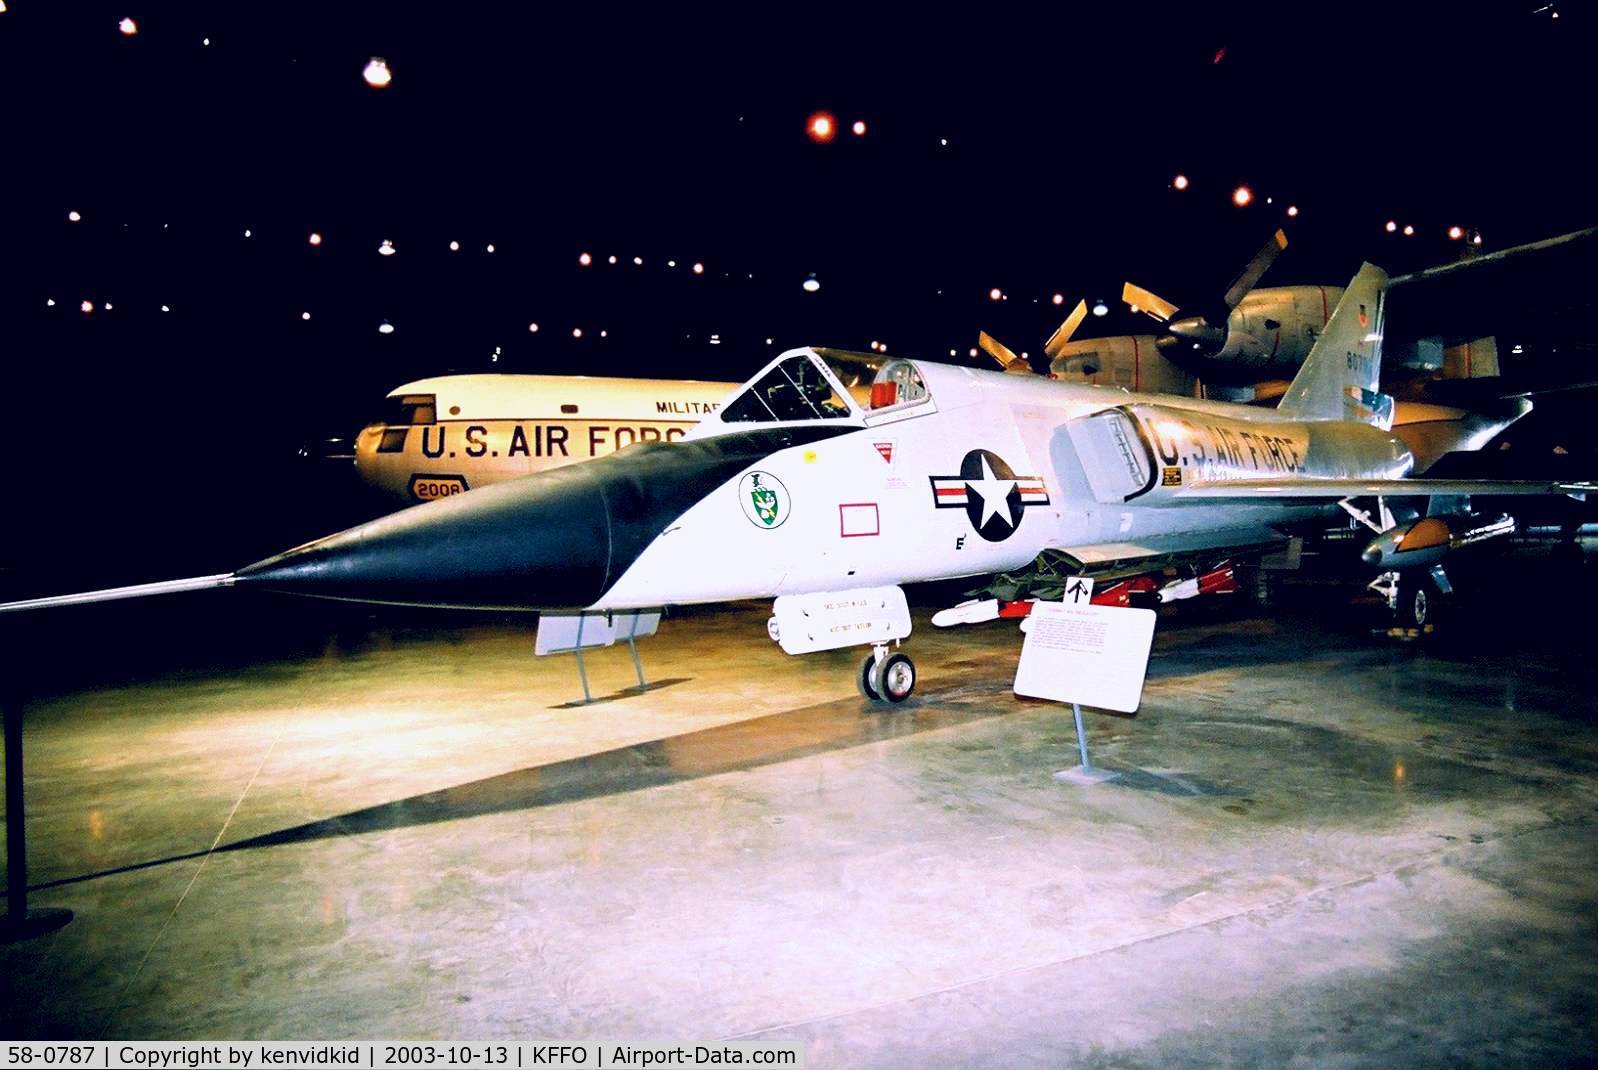 58-0787, 1958 Convair F-106A Delta Dart C/N 8-24-118, At the Museum of the United States Air Force Dayton Ohio.